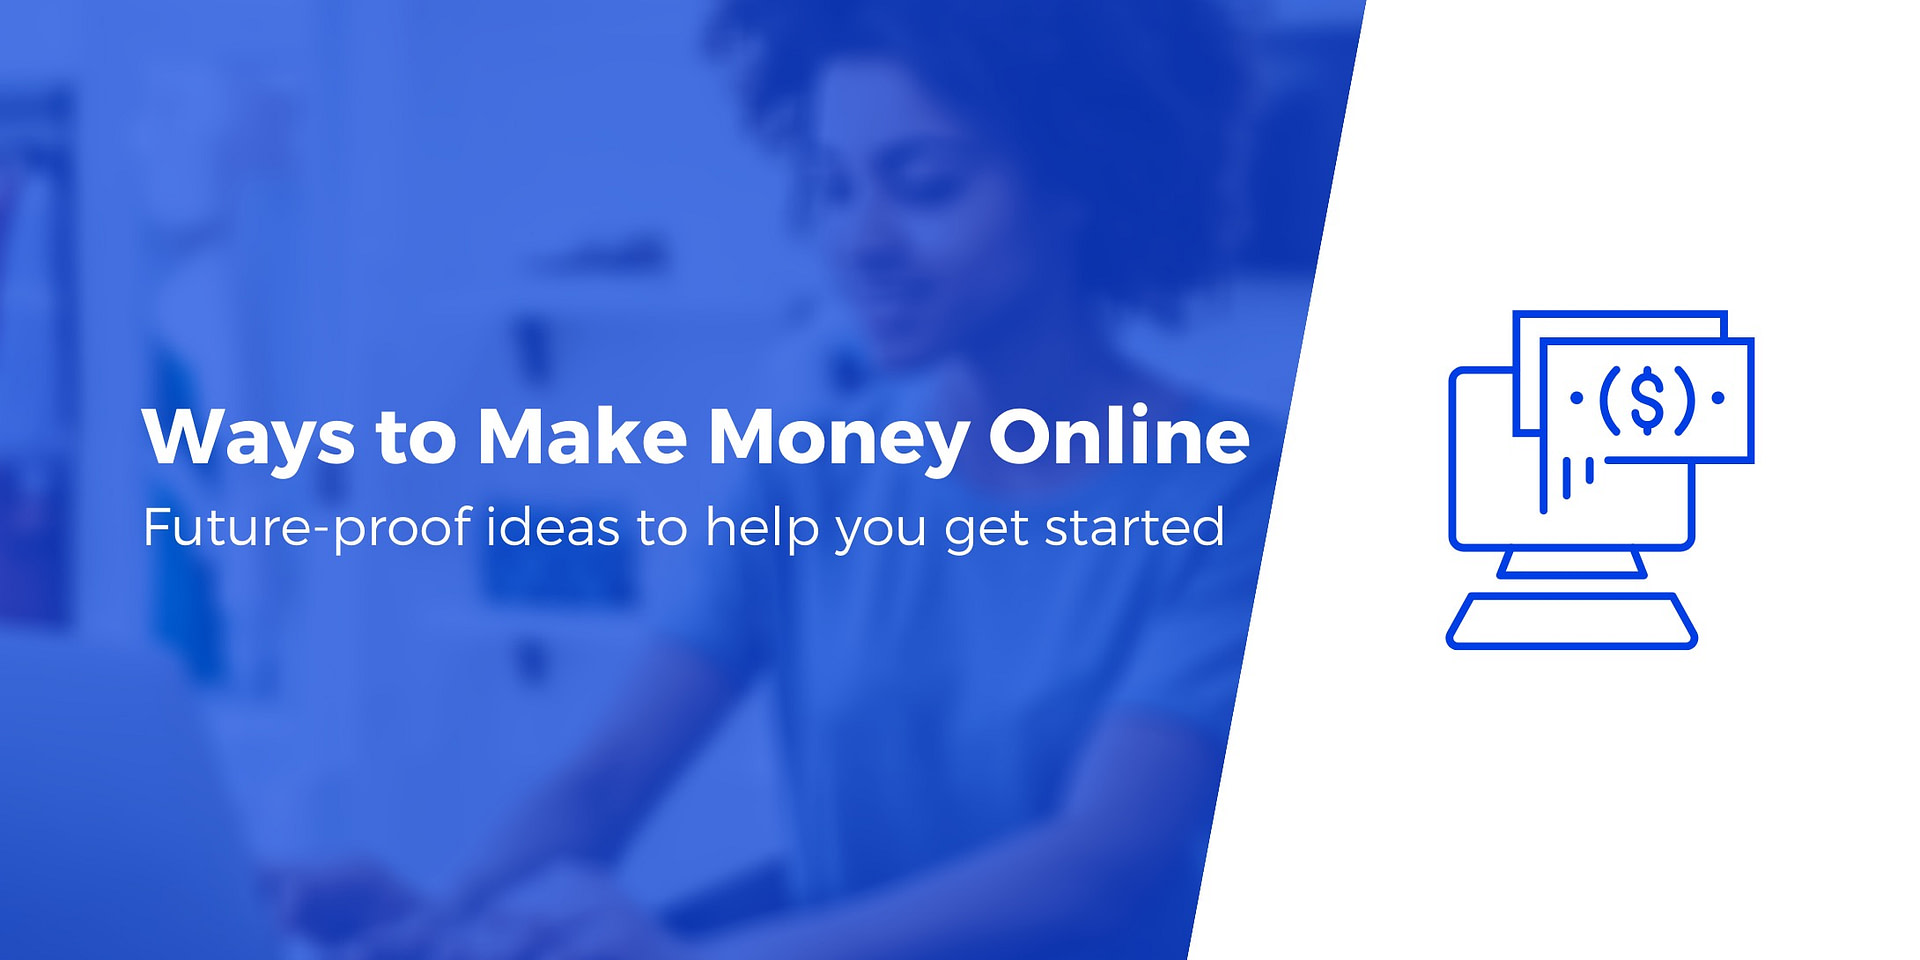 What Does How To Make Money Online: See 32 Ways ... Mean?